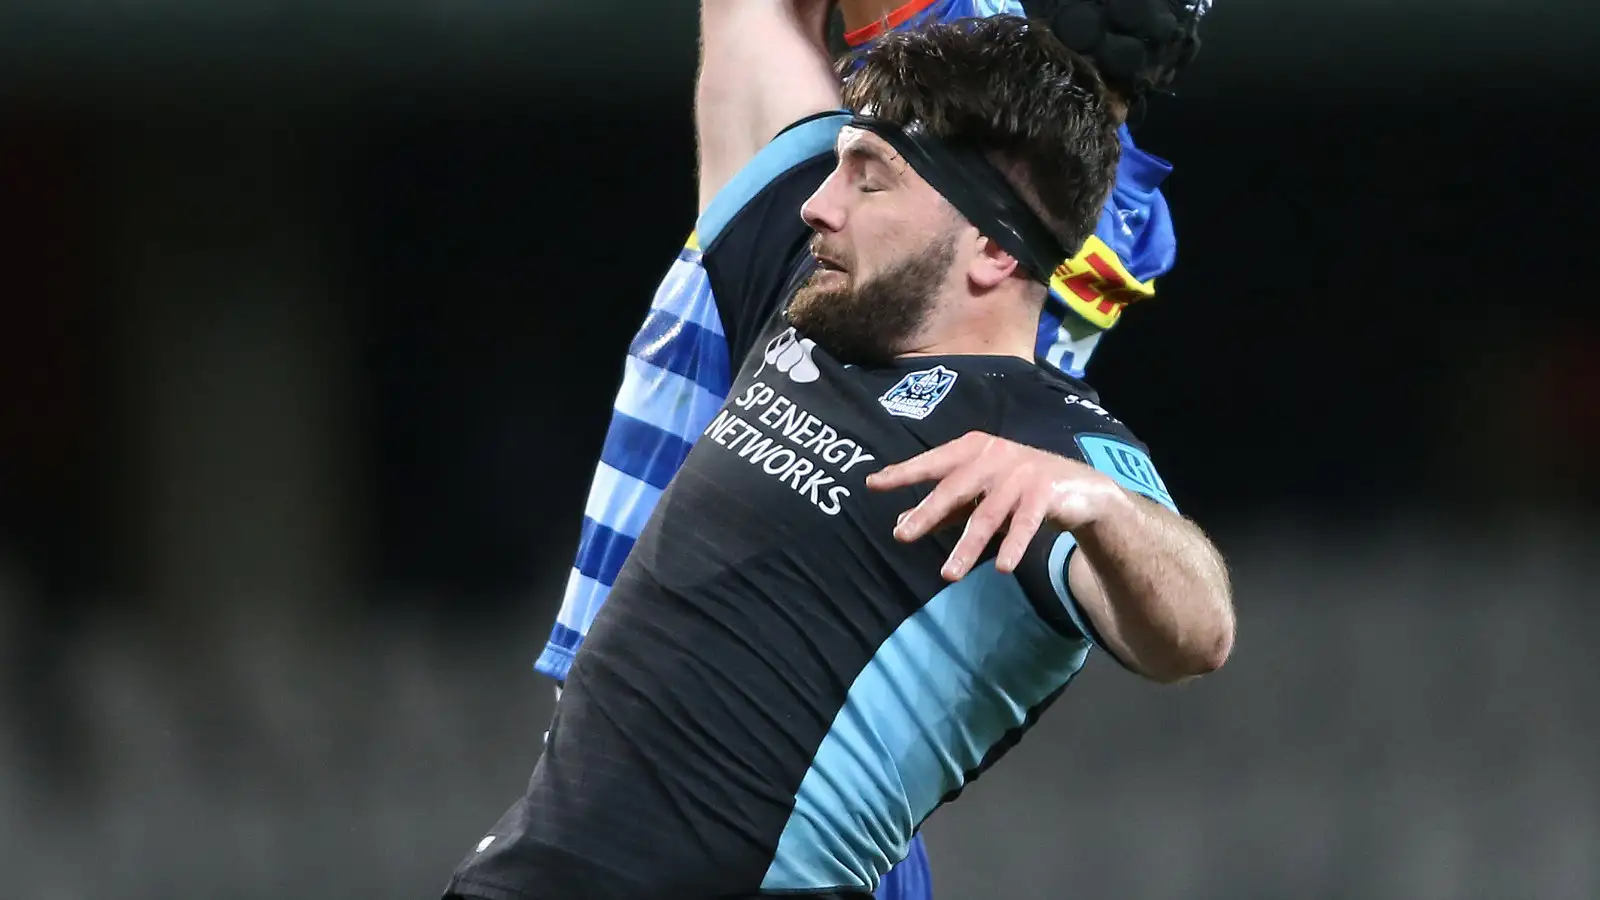 Glasgow Warriors aim to start with a bang as they return to the top table  of European rugby